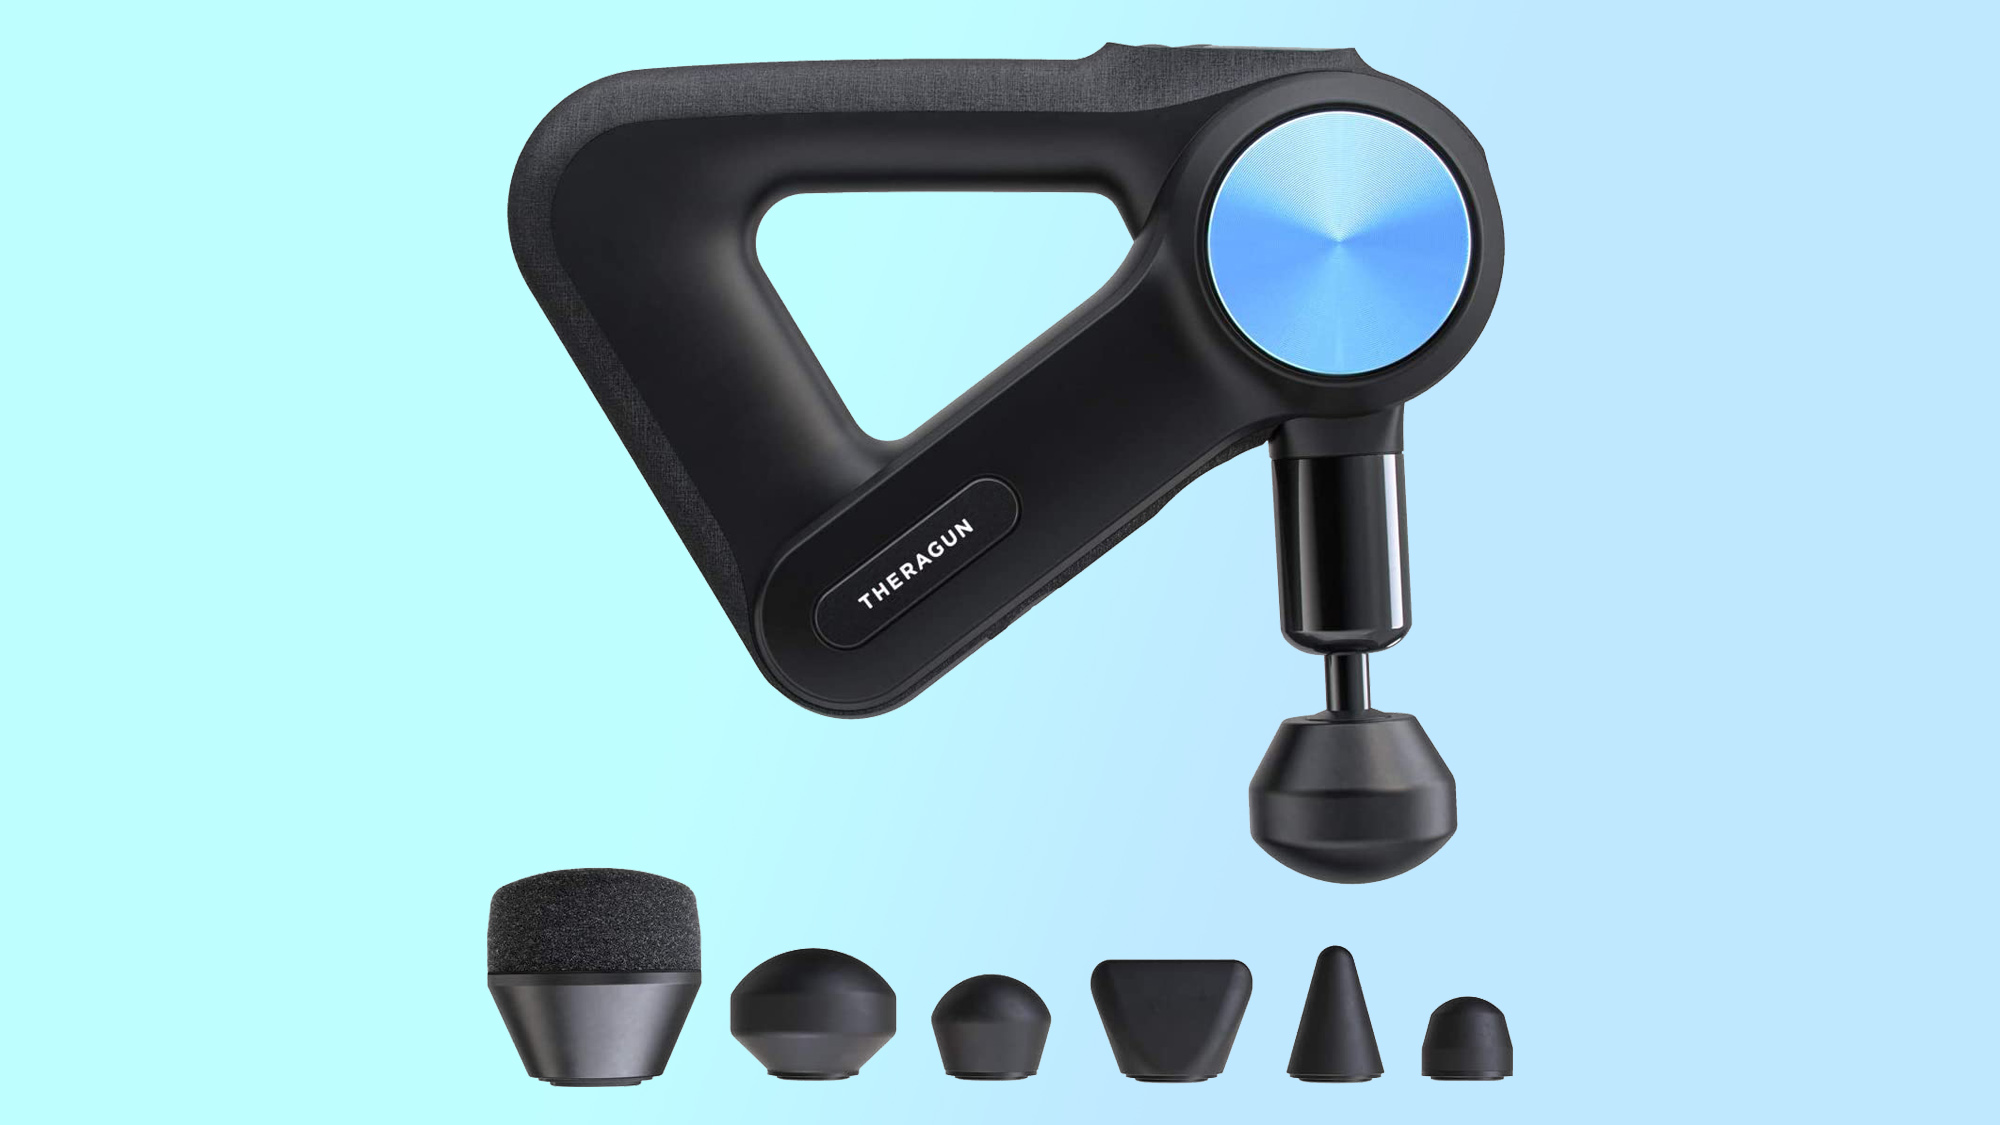 An image of the Theragun Pro one of the best massage guns